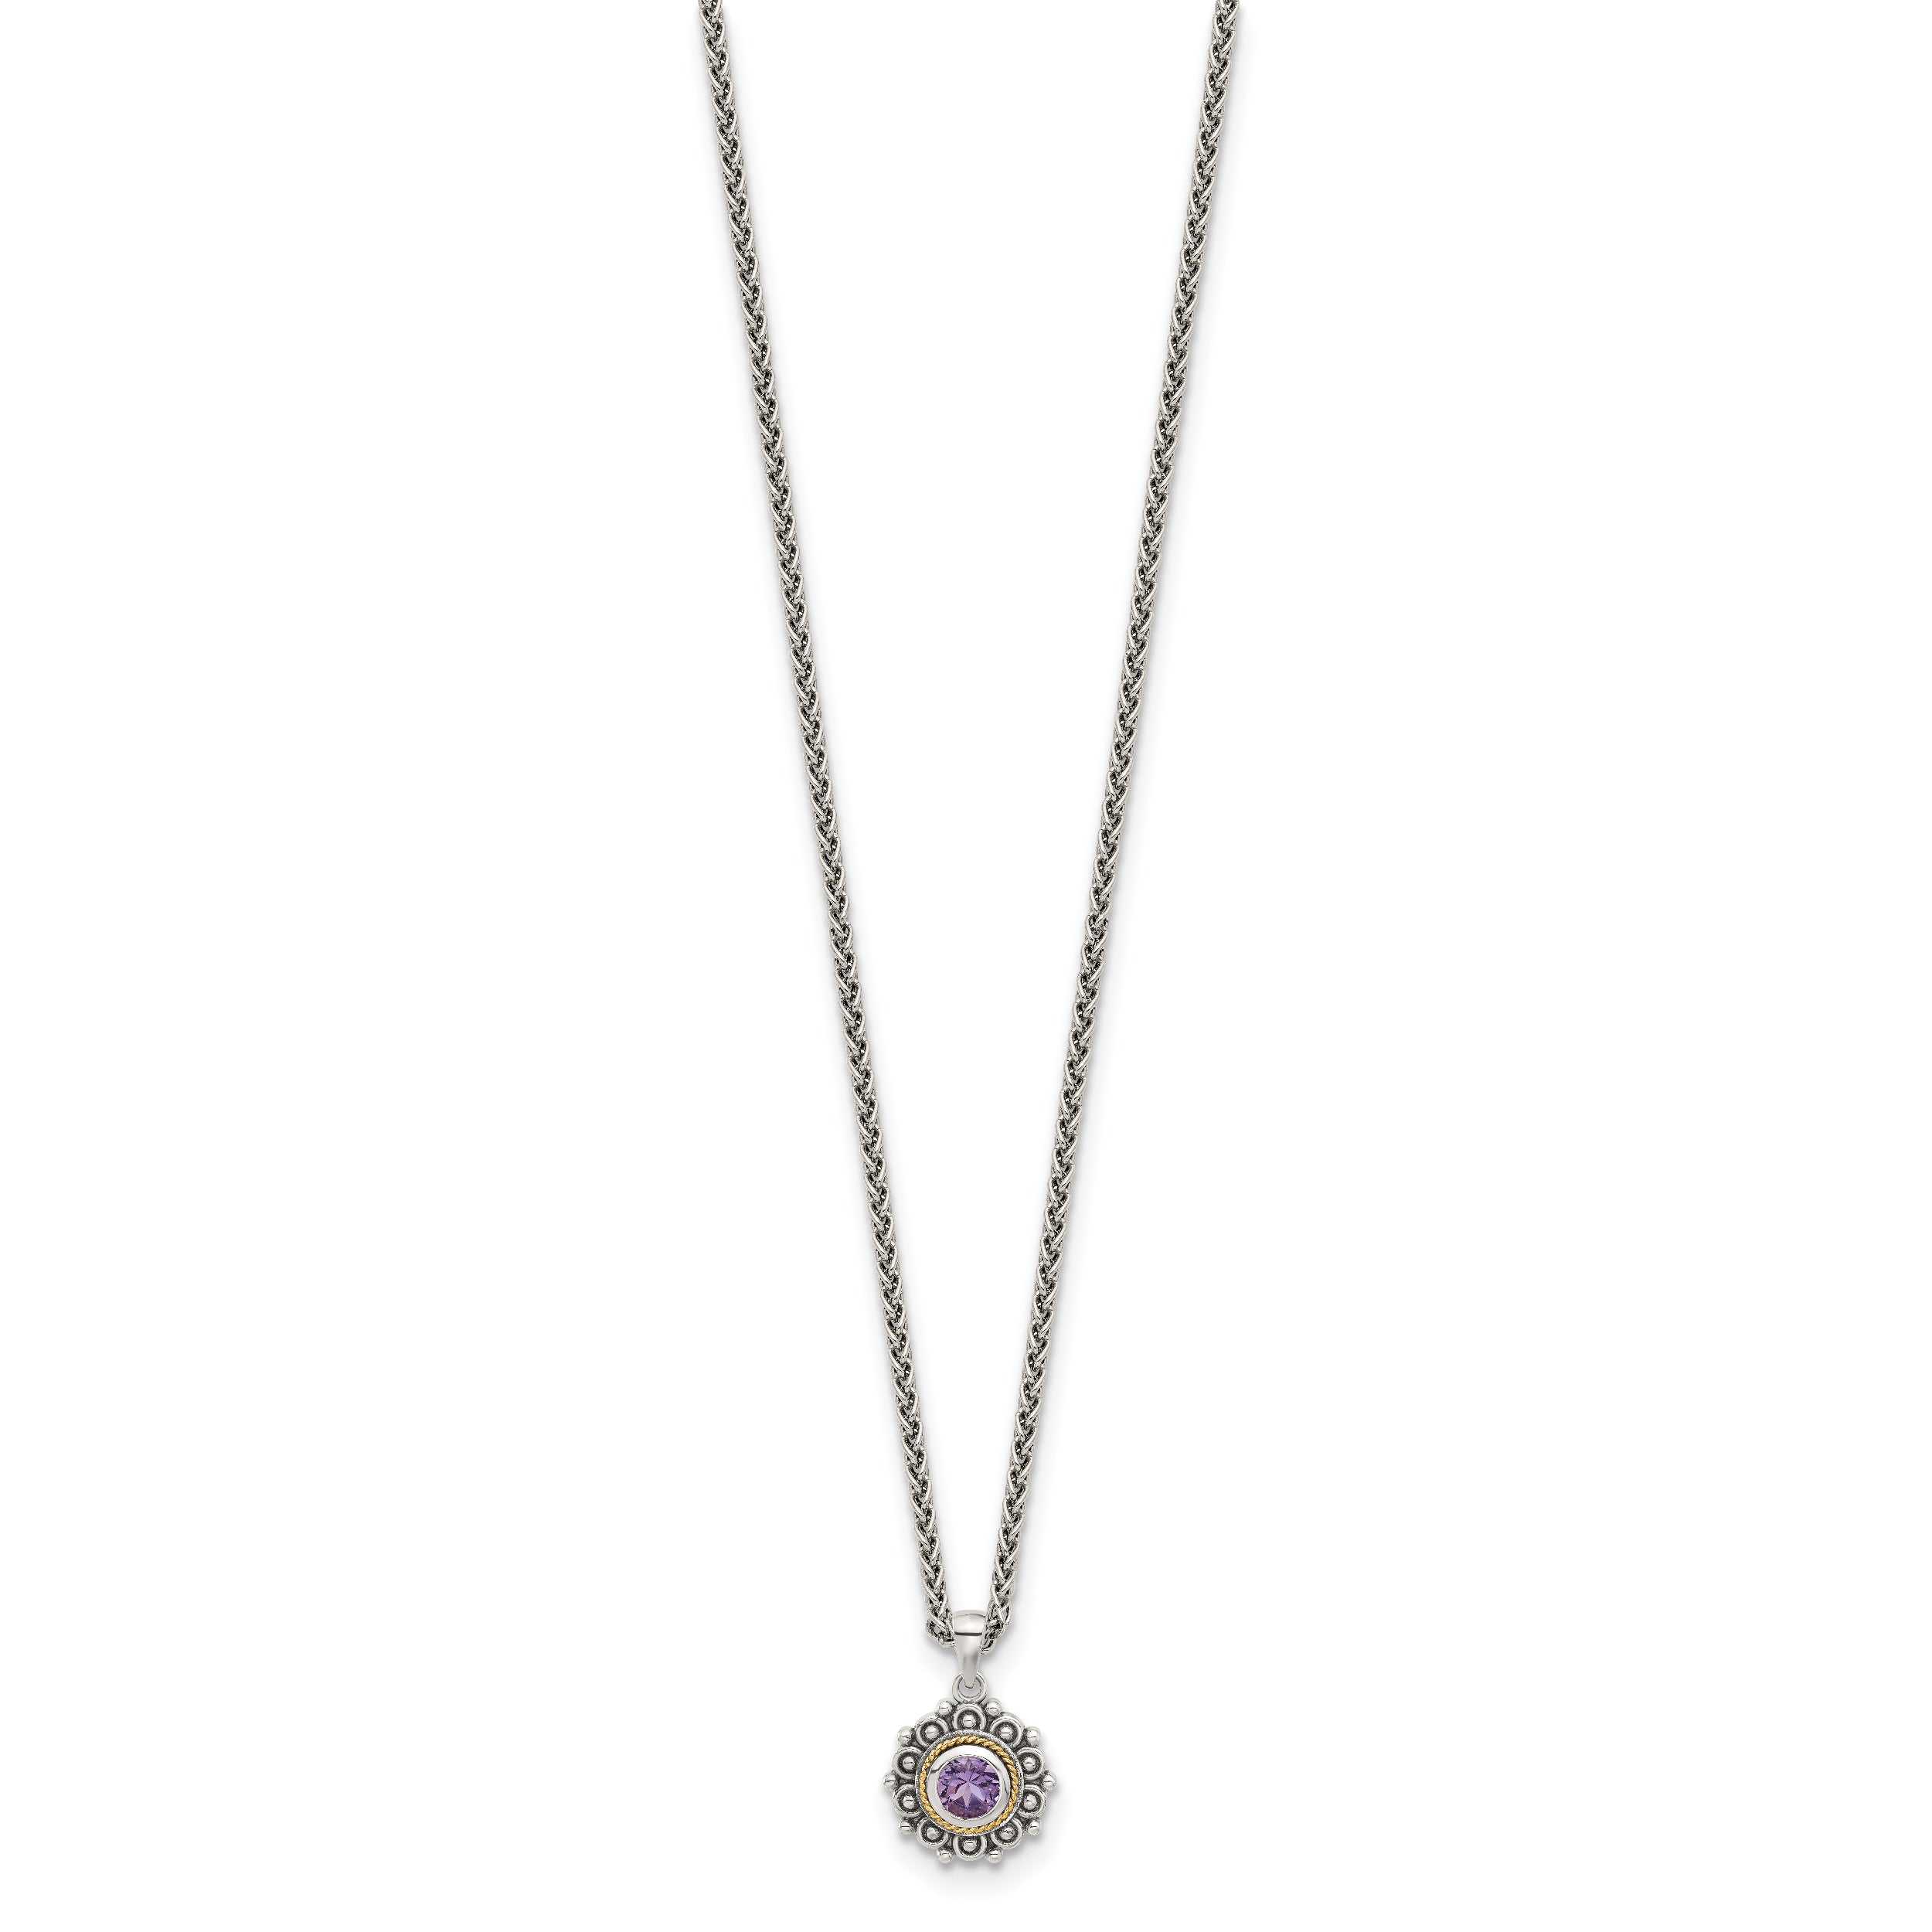 Shey Couture Sterling Silver with 14k Accent Antiqued Amethyst 18 inch Necklace